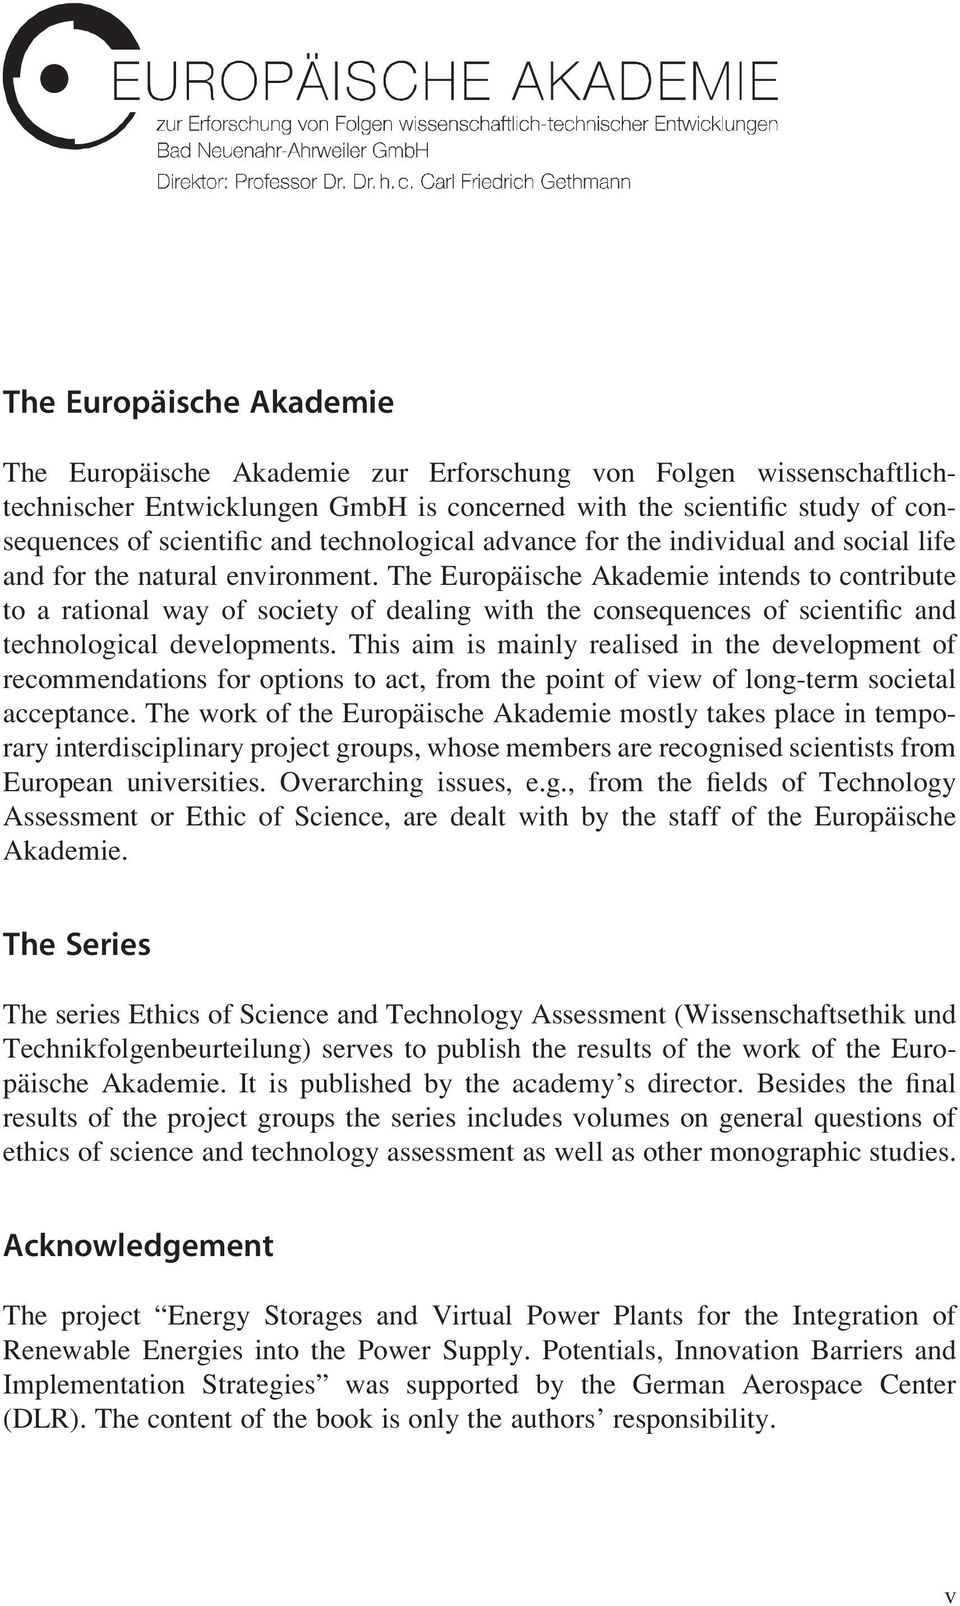 The Europäische Akademie intends to contribute to a rational way of society of dealing with the consequences of scientific and technological developments.